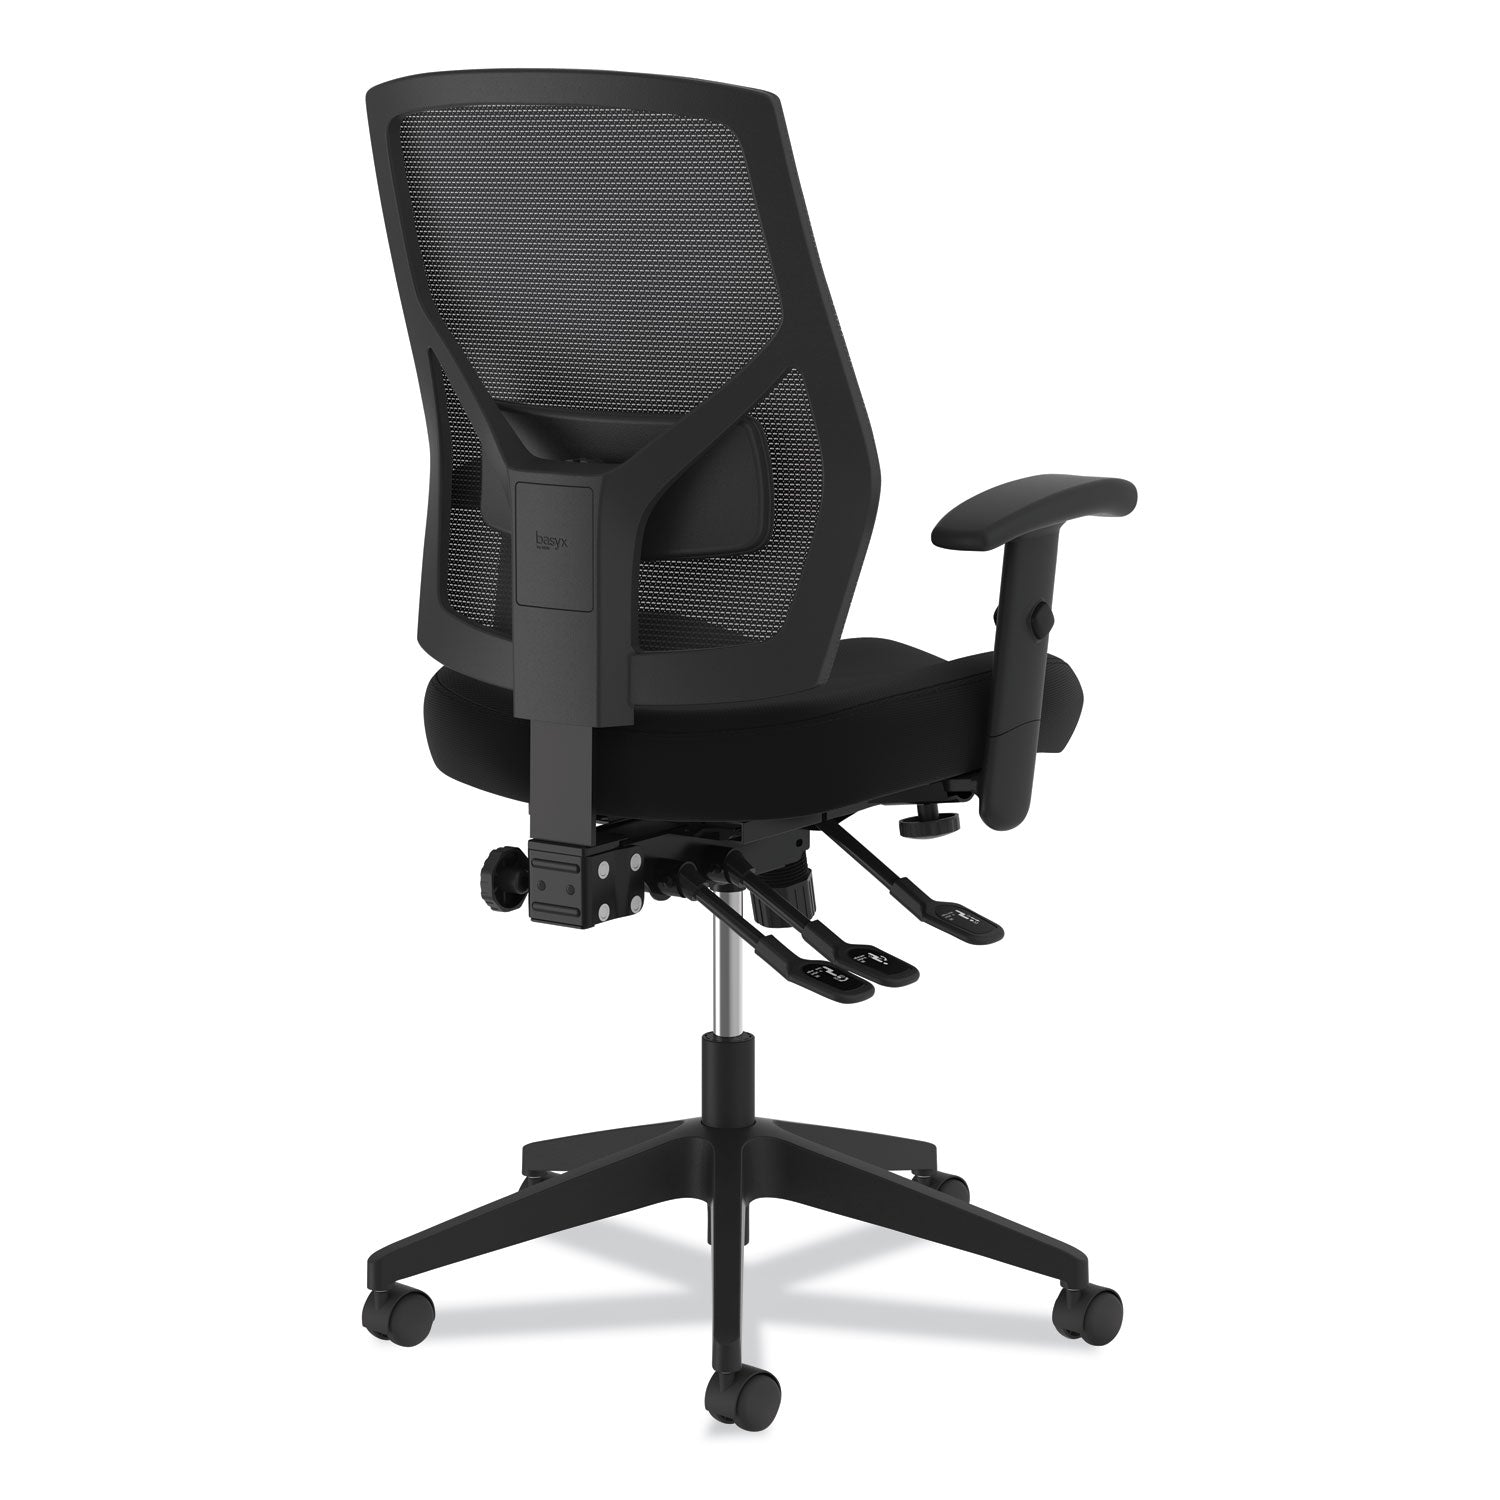 crio-high-back-task-chair-with-asynchronous-control-supports-up-to-250-lb-18-to-22-seat-height-black_bsxvl582sb11t - 3